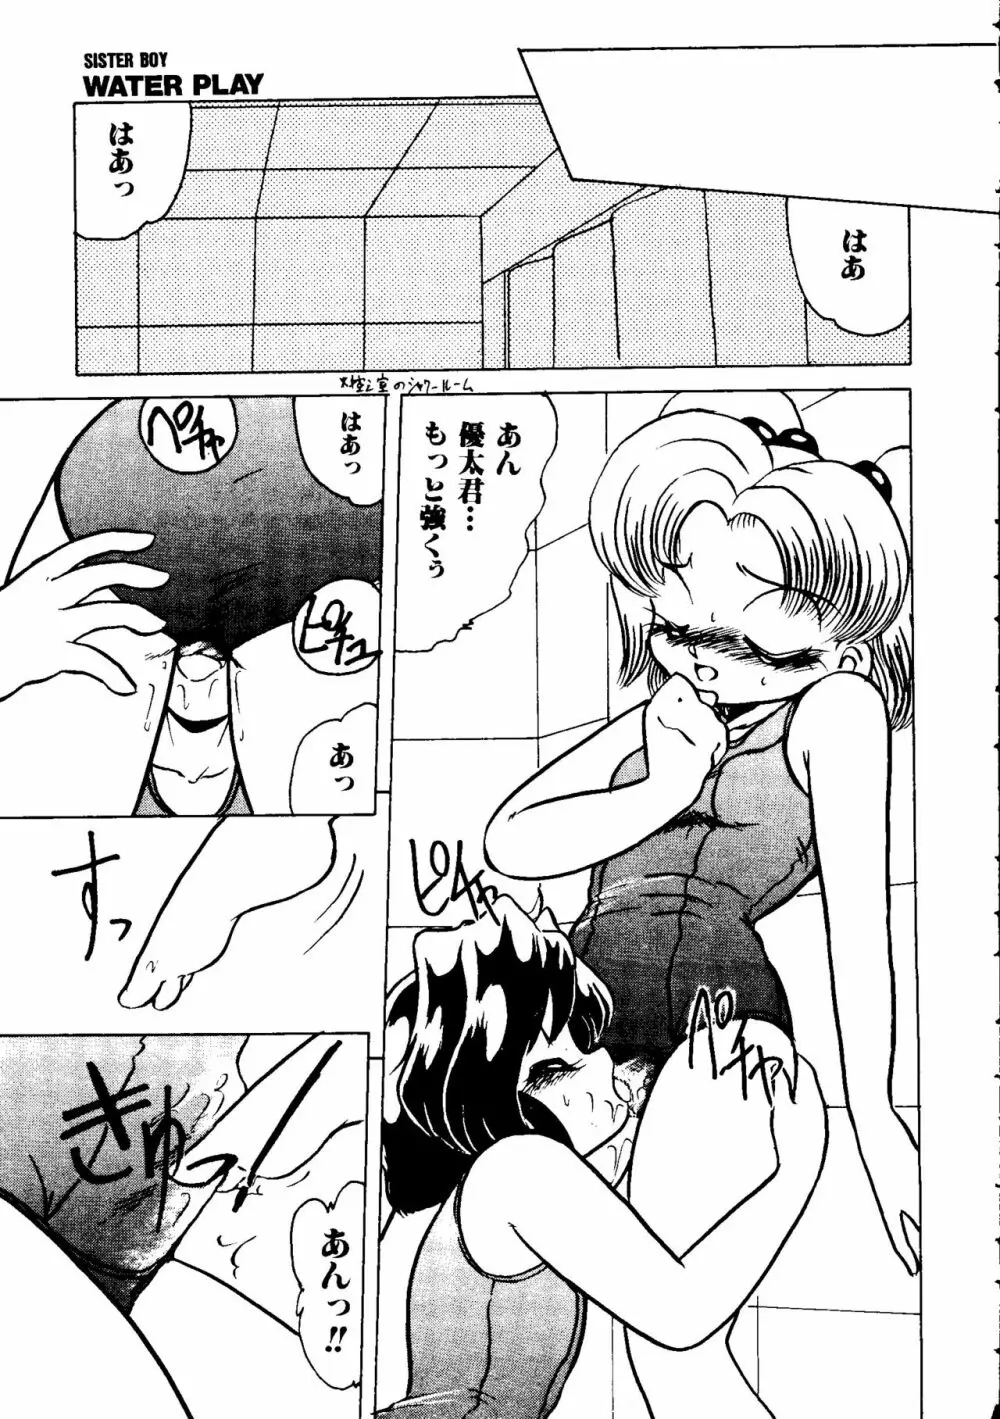 SISTER BOY EX2 -WATER PLAY- Page.13